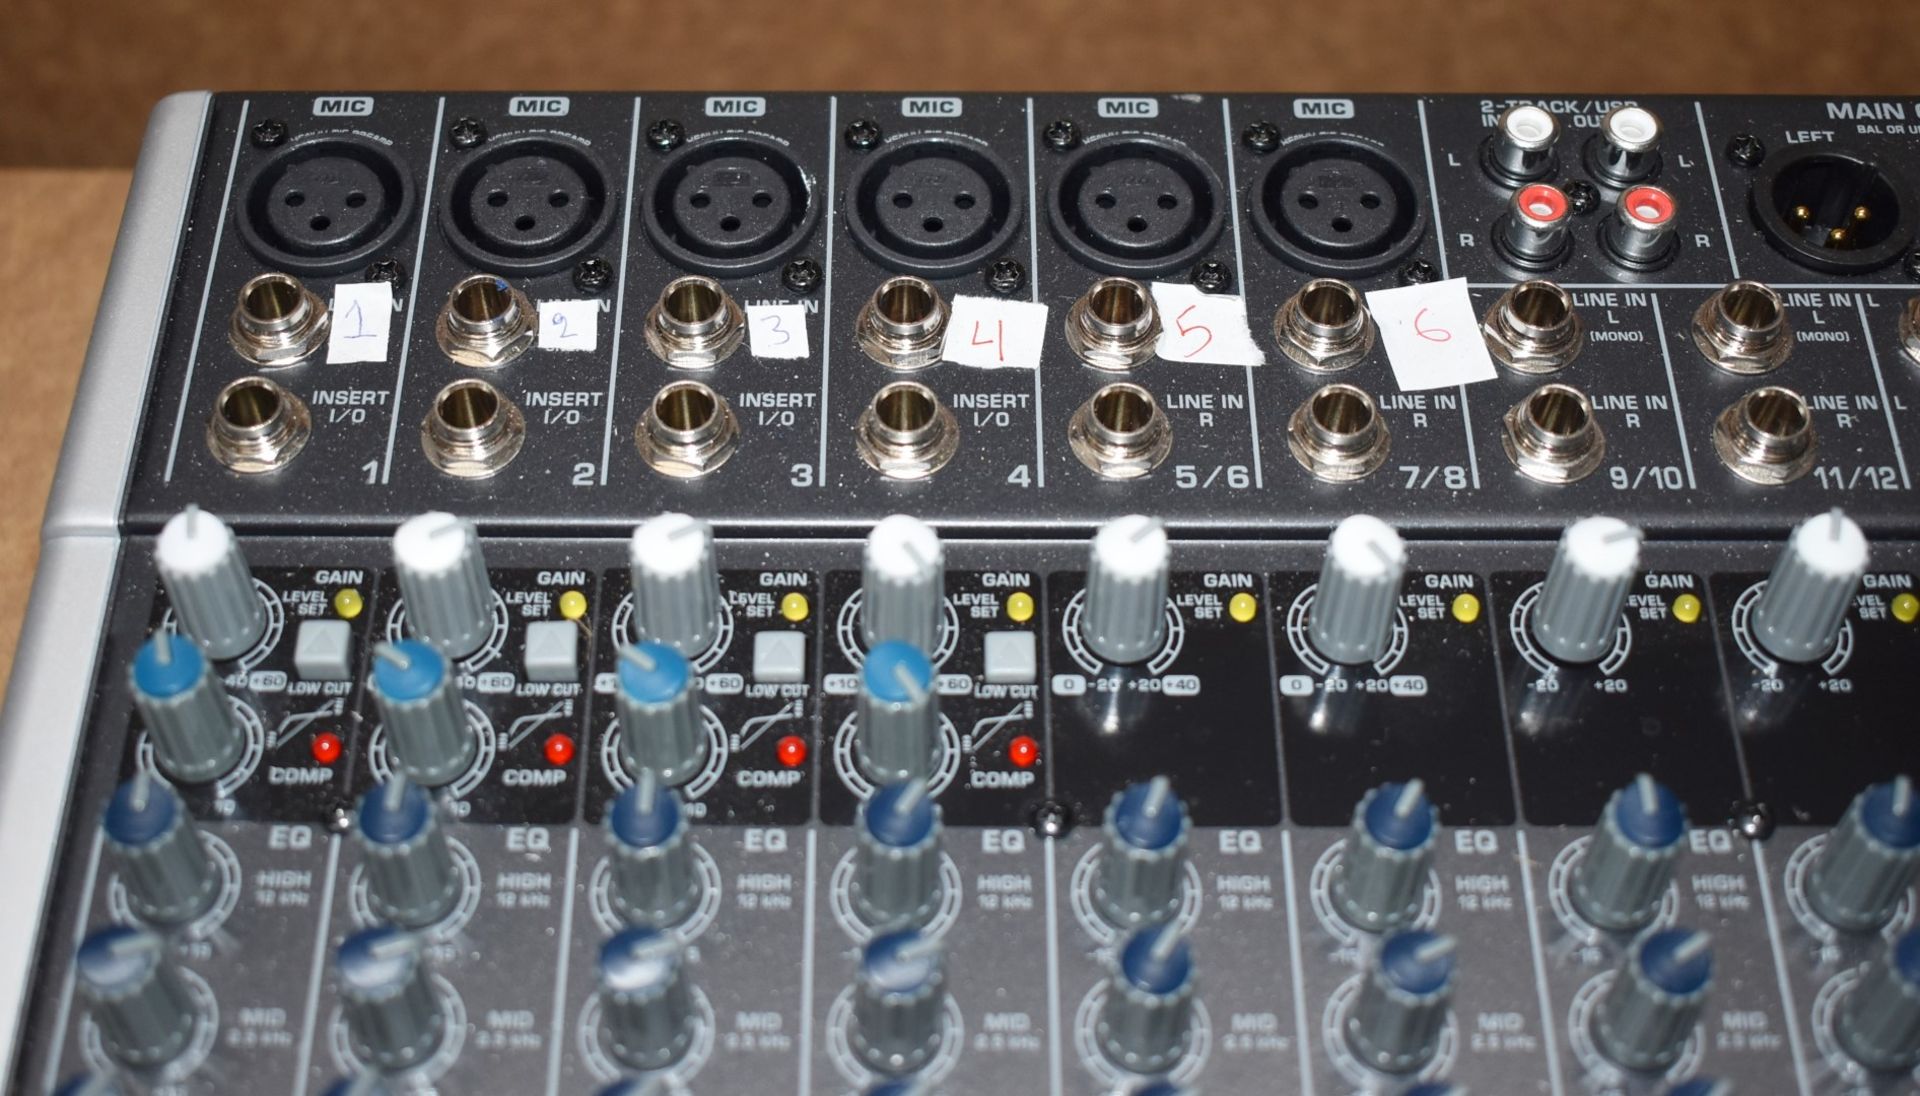 1 x Behringer Xenyx 12 Channel Analog Audio Mixer - Model X1222USB - Includes Power Cable - Ref: - Image 10 of 13